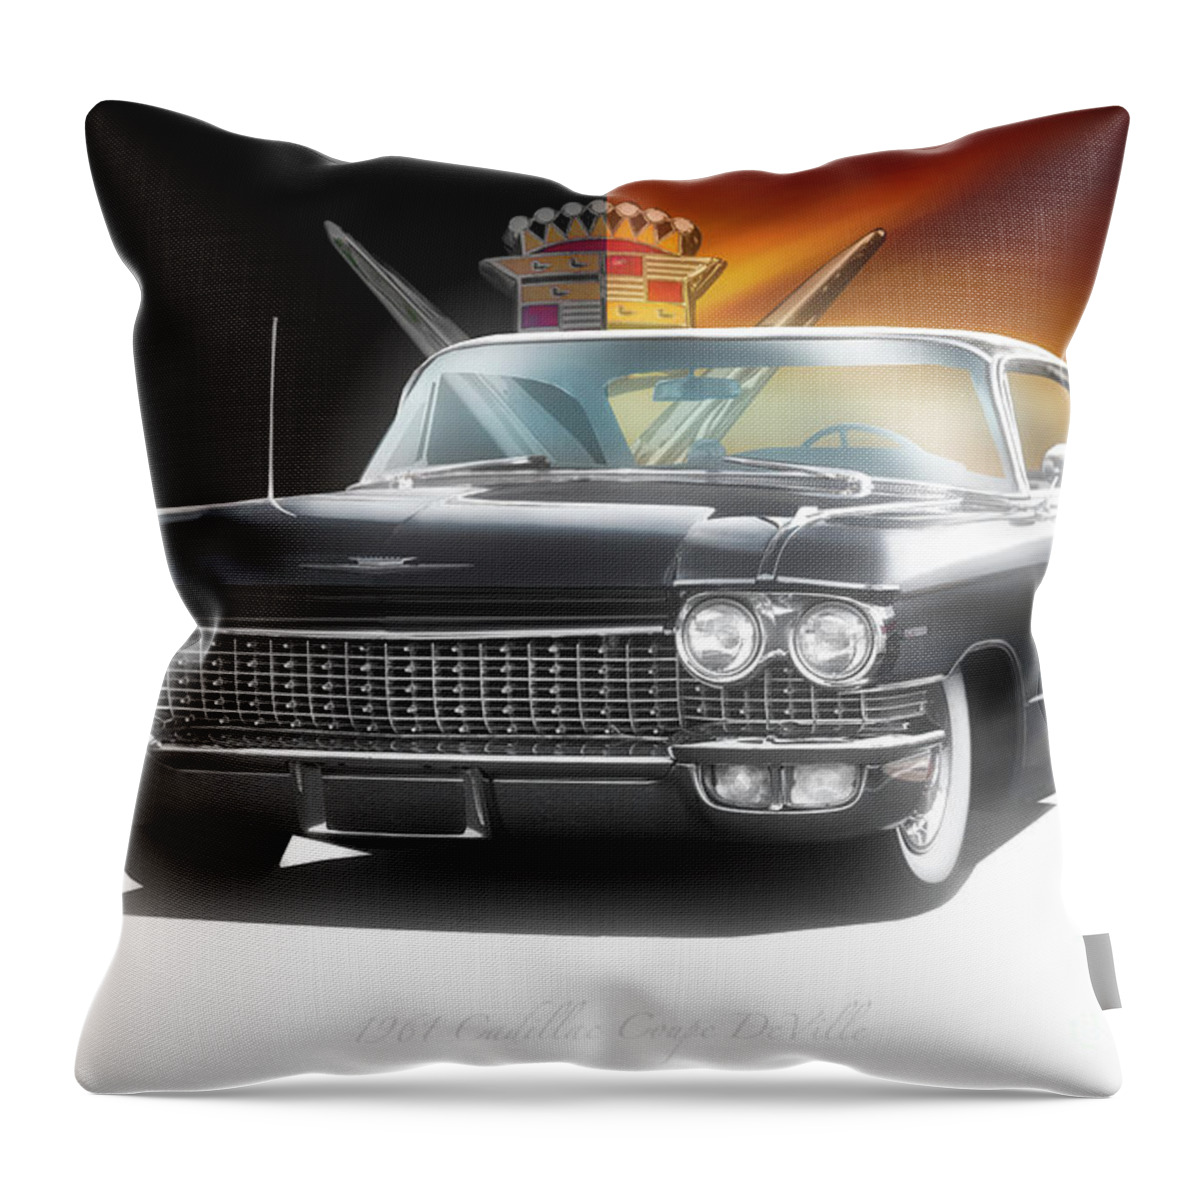 1961 Cadillac Coupe Deville Throw Pillow featuring the photograph 1961 Cadillac Coupe DeVille by Dave Koontz